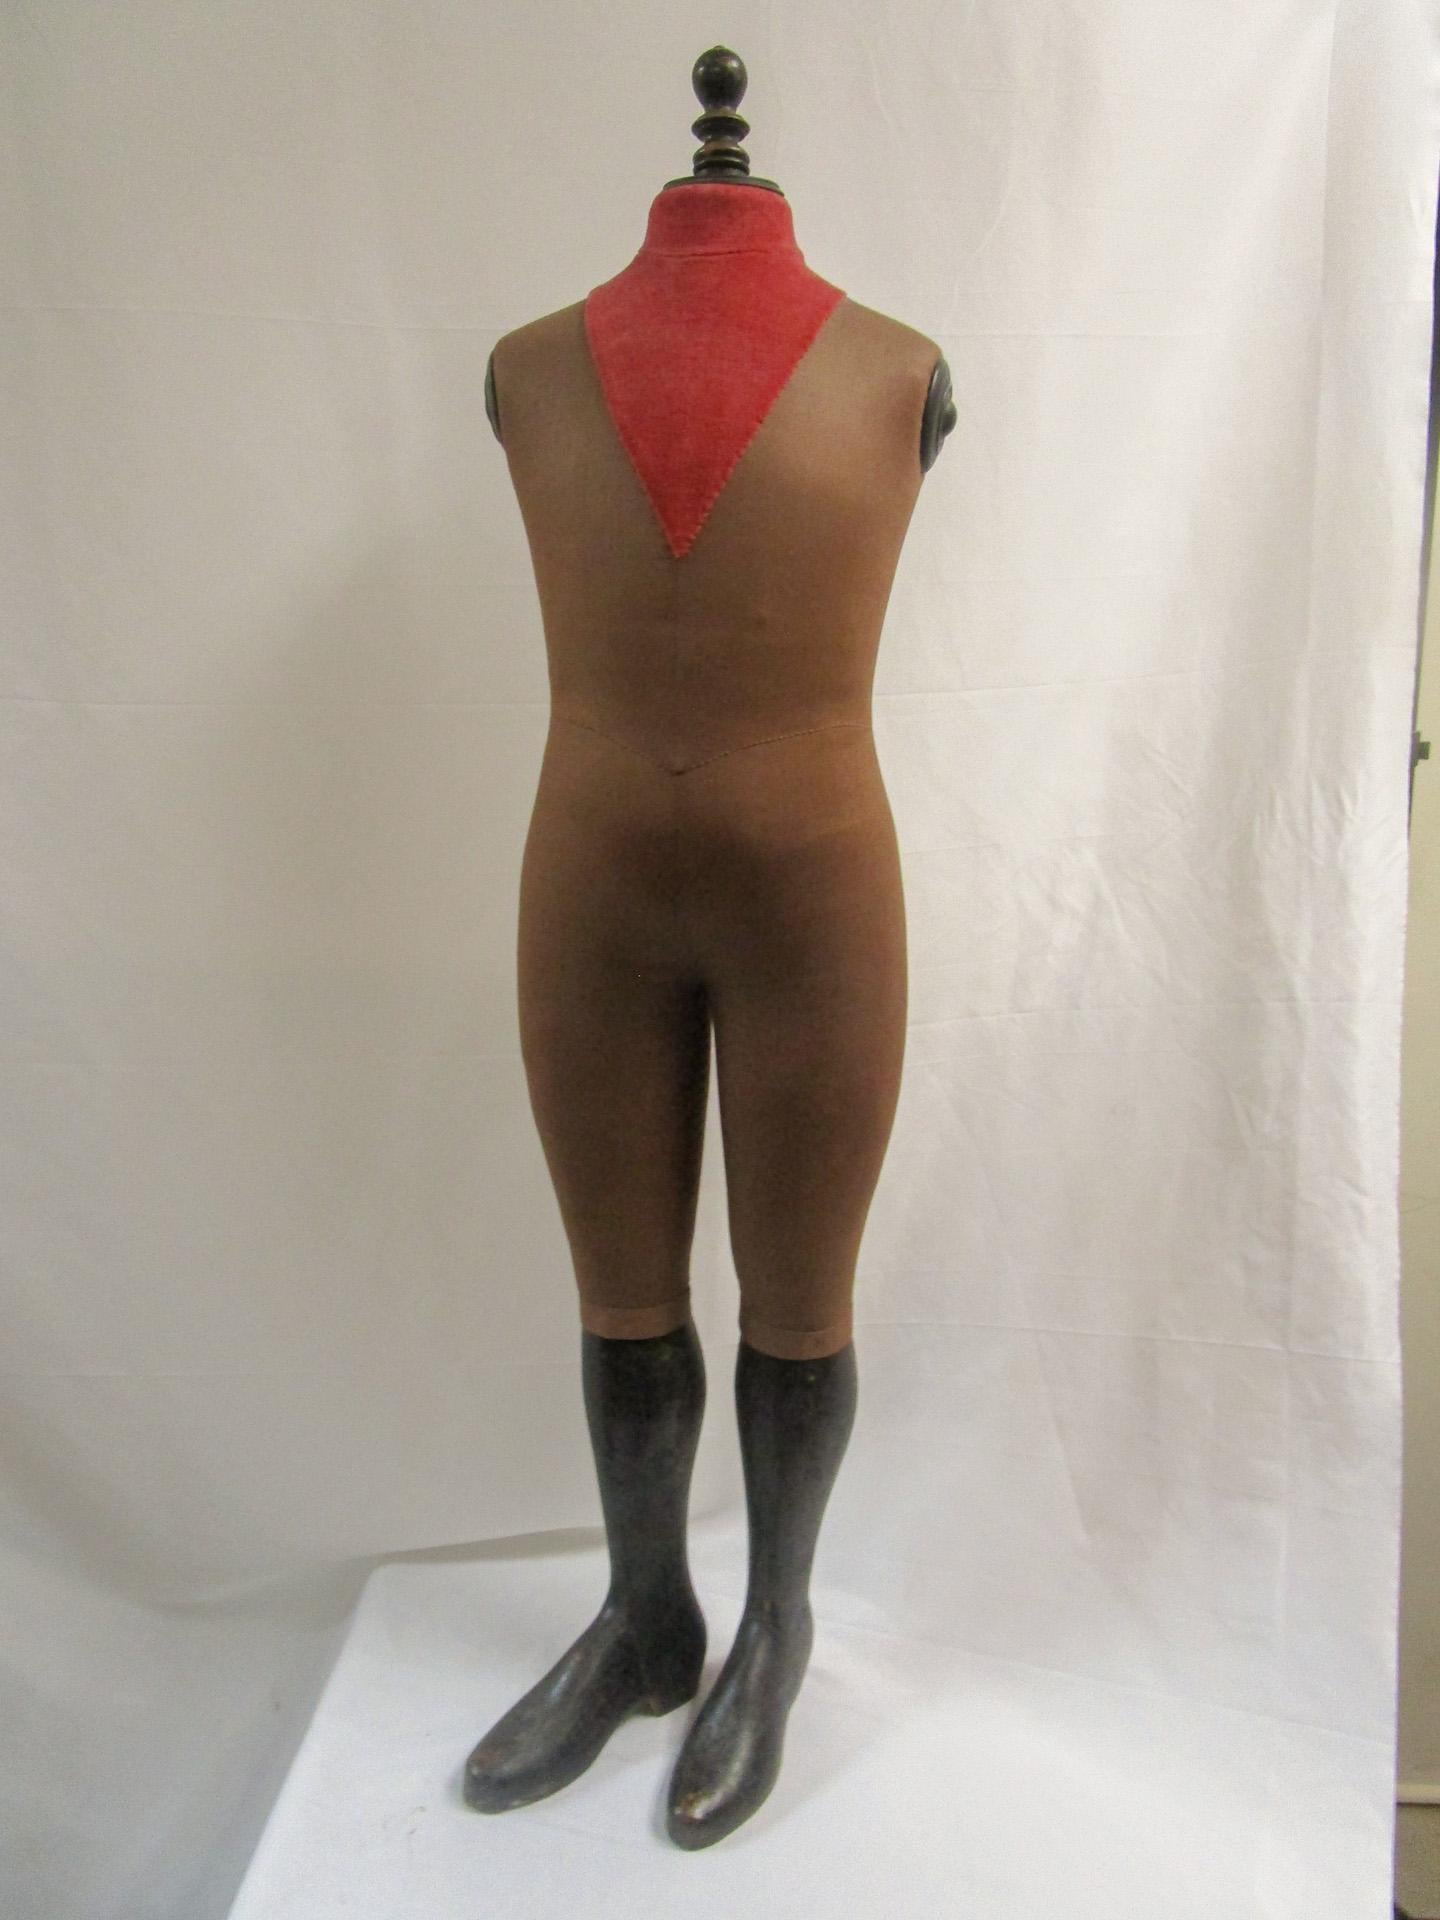 This rare 19th century free-standing child's mannequin is probably from Siegel & Stockman, a Paris, France company that made tailor's dummies, window bustforms, mannequins and accessories hangers since 1867. Stockman's mannequins are famous